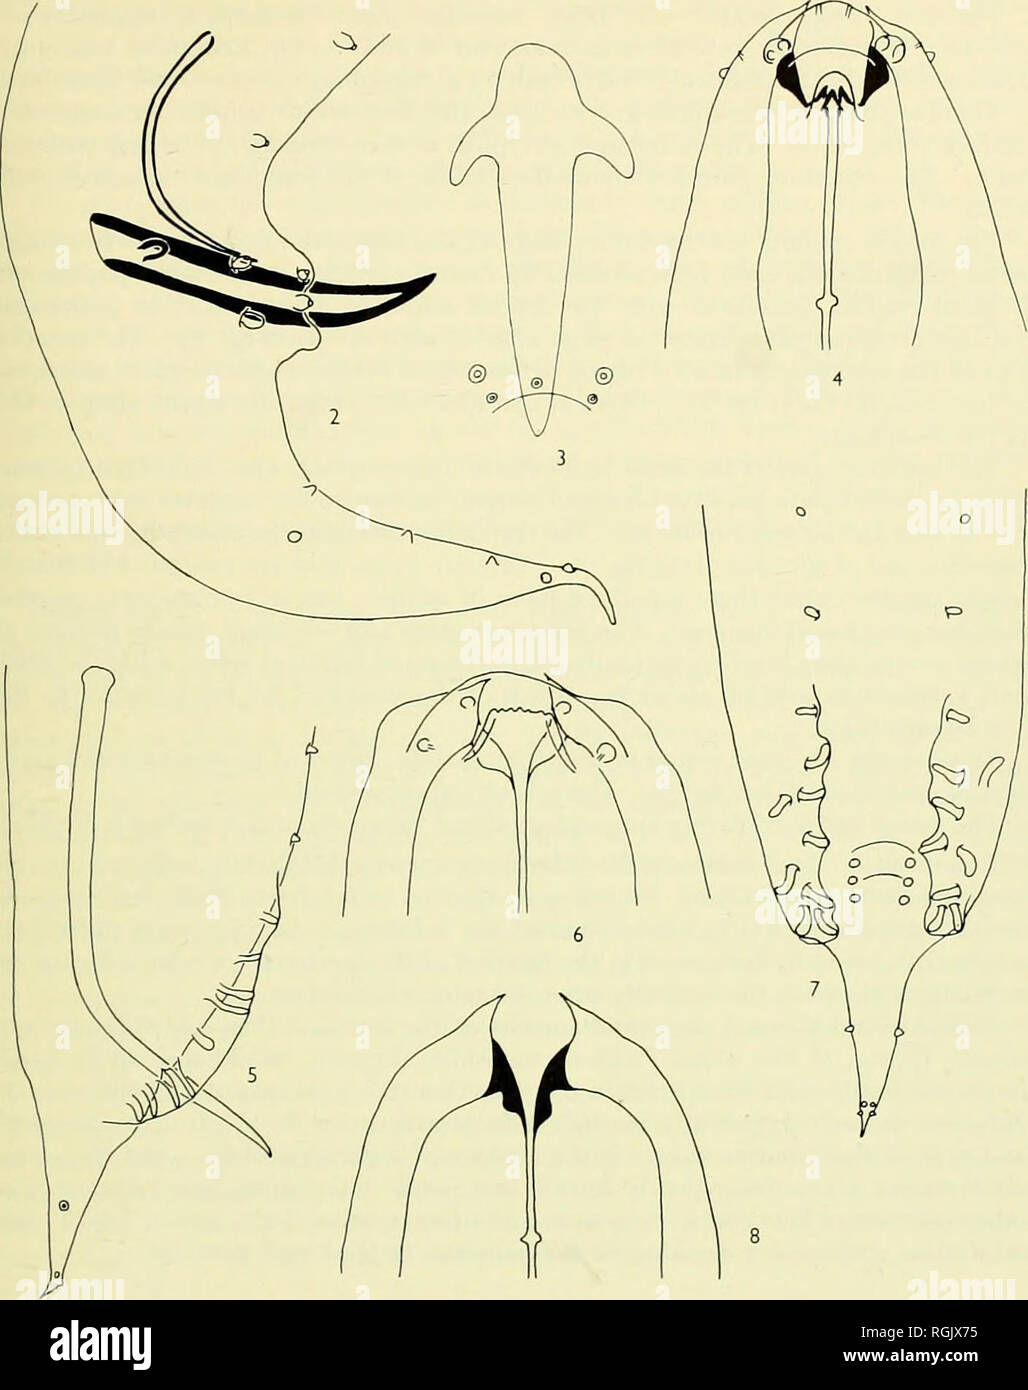 . Bulletin of the British Museum (Natural History). NEMATODES OF FROGS 167. Figs. 2-8. Austracerca flindersi. 1. Lateral view of male tail. 3. Ventral view of gubernaculum and papillae on anterior lip of cloacal opening. 4. Dorsal view of head showing detail of buccal caity. 5-8. Raillietnema karlanum. 5. Lateral iew of male tail. 6. Dorsal view of head. 7. 'entral view of male tail showing distribution of caudal papillae. 8. Head in optical section showing shape of cuticular thickening at anterior end of oesophagus.. Please note that these images are extracted from scanned page images that Stock Photo